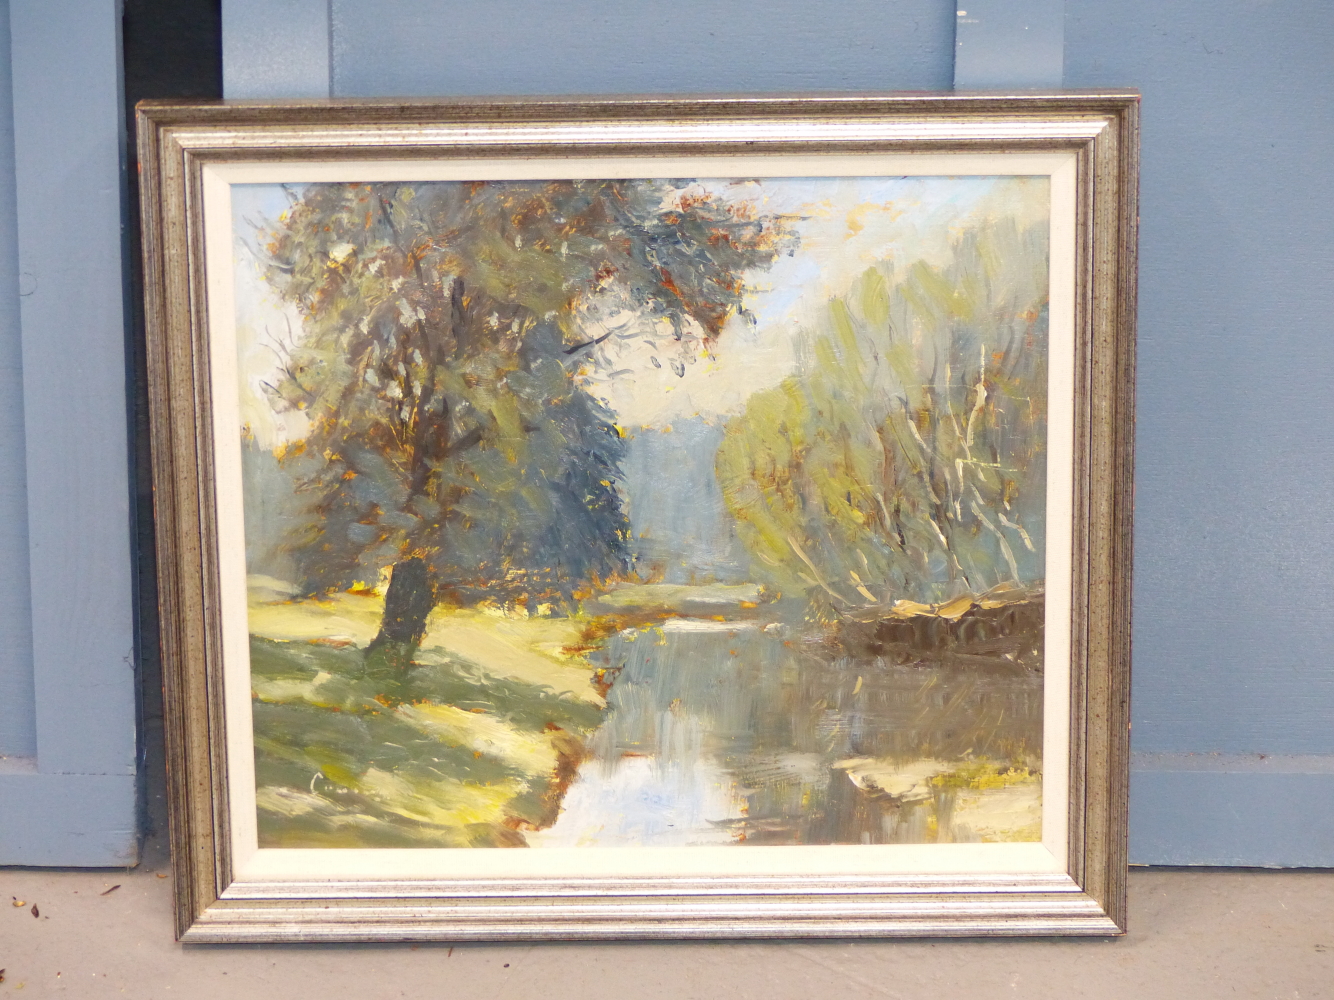 20th C. ENGLISH SCHOOL SUNLIT RIVER LANDSCAPE, SIGNED CUMING, OIL ON BOARD, 33 x - Image 3 of 5